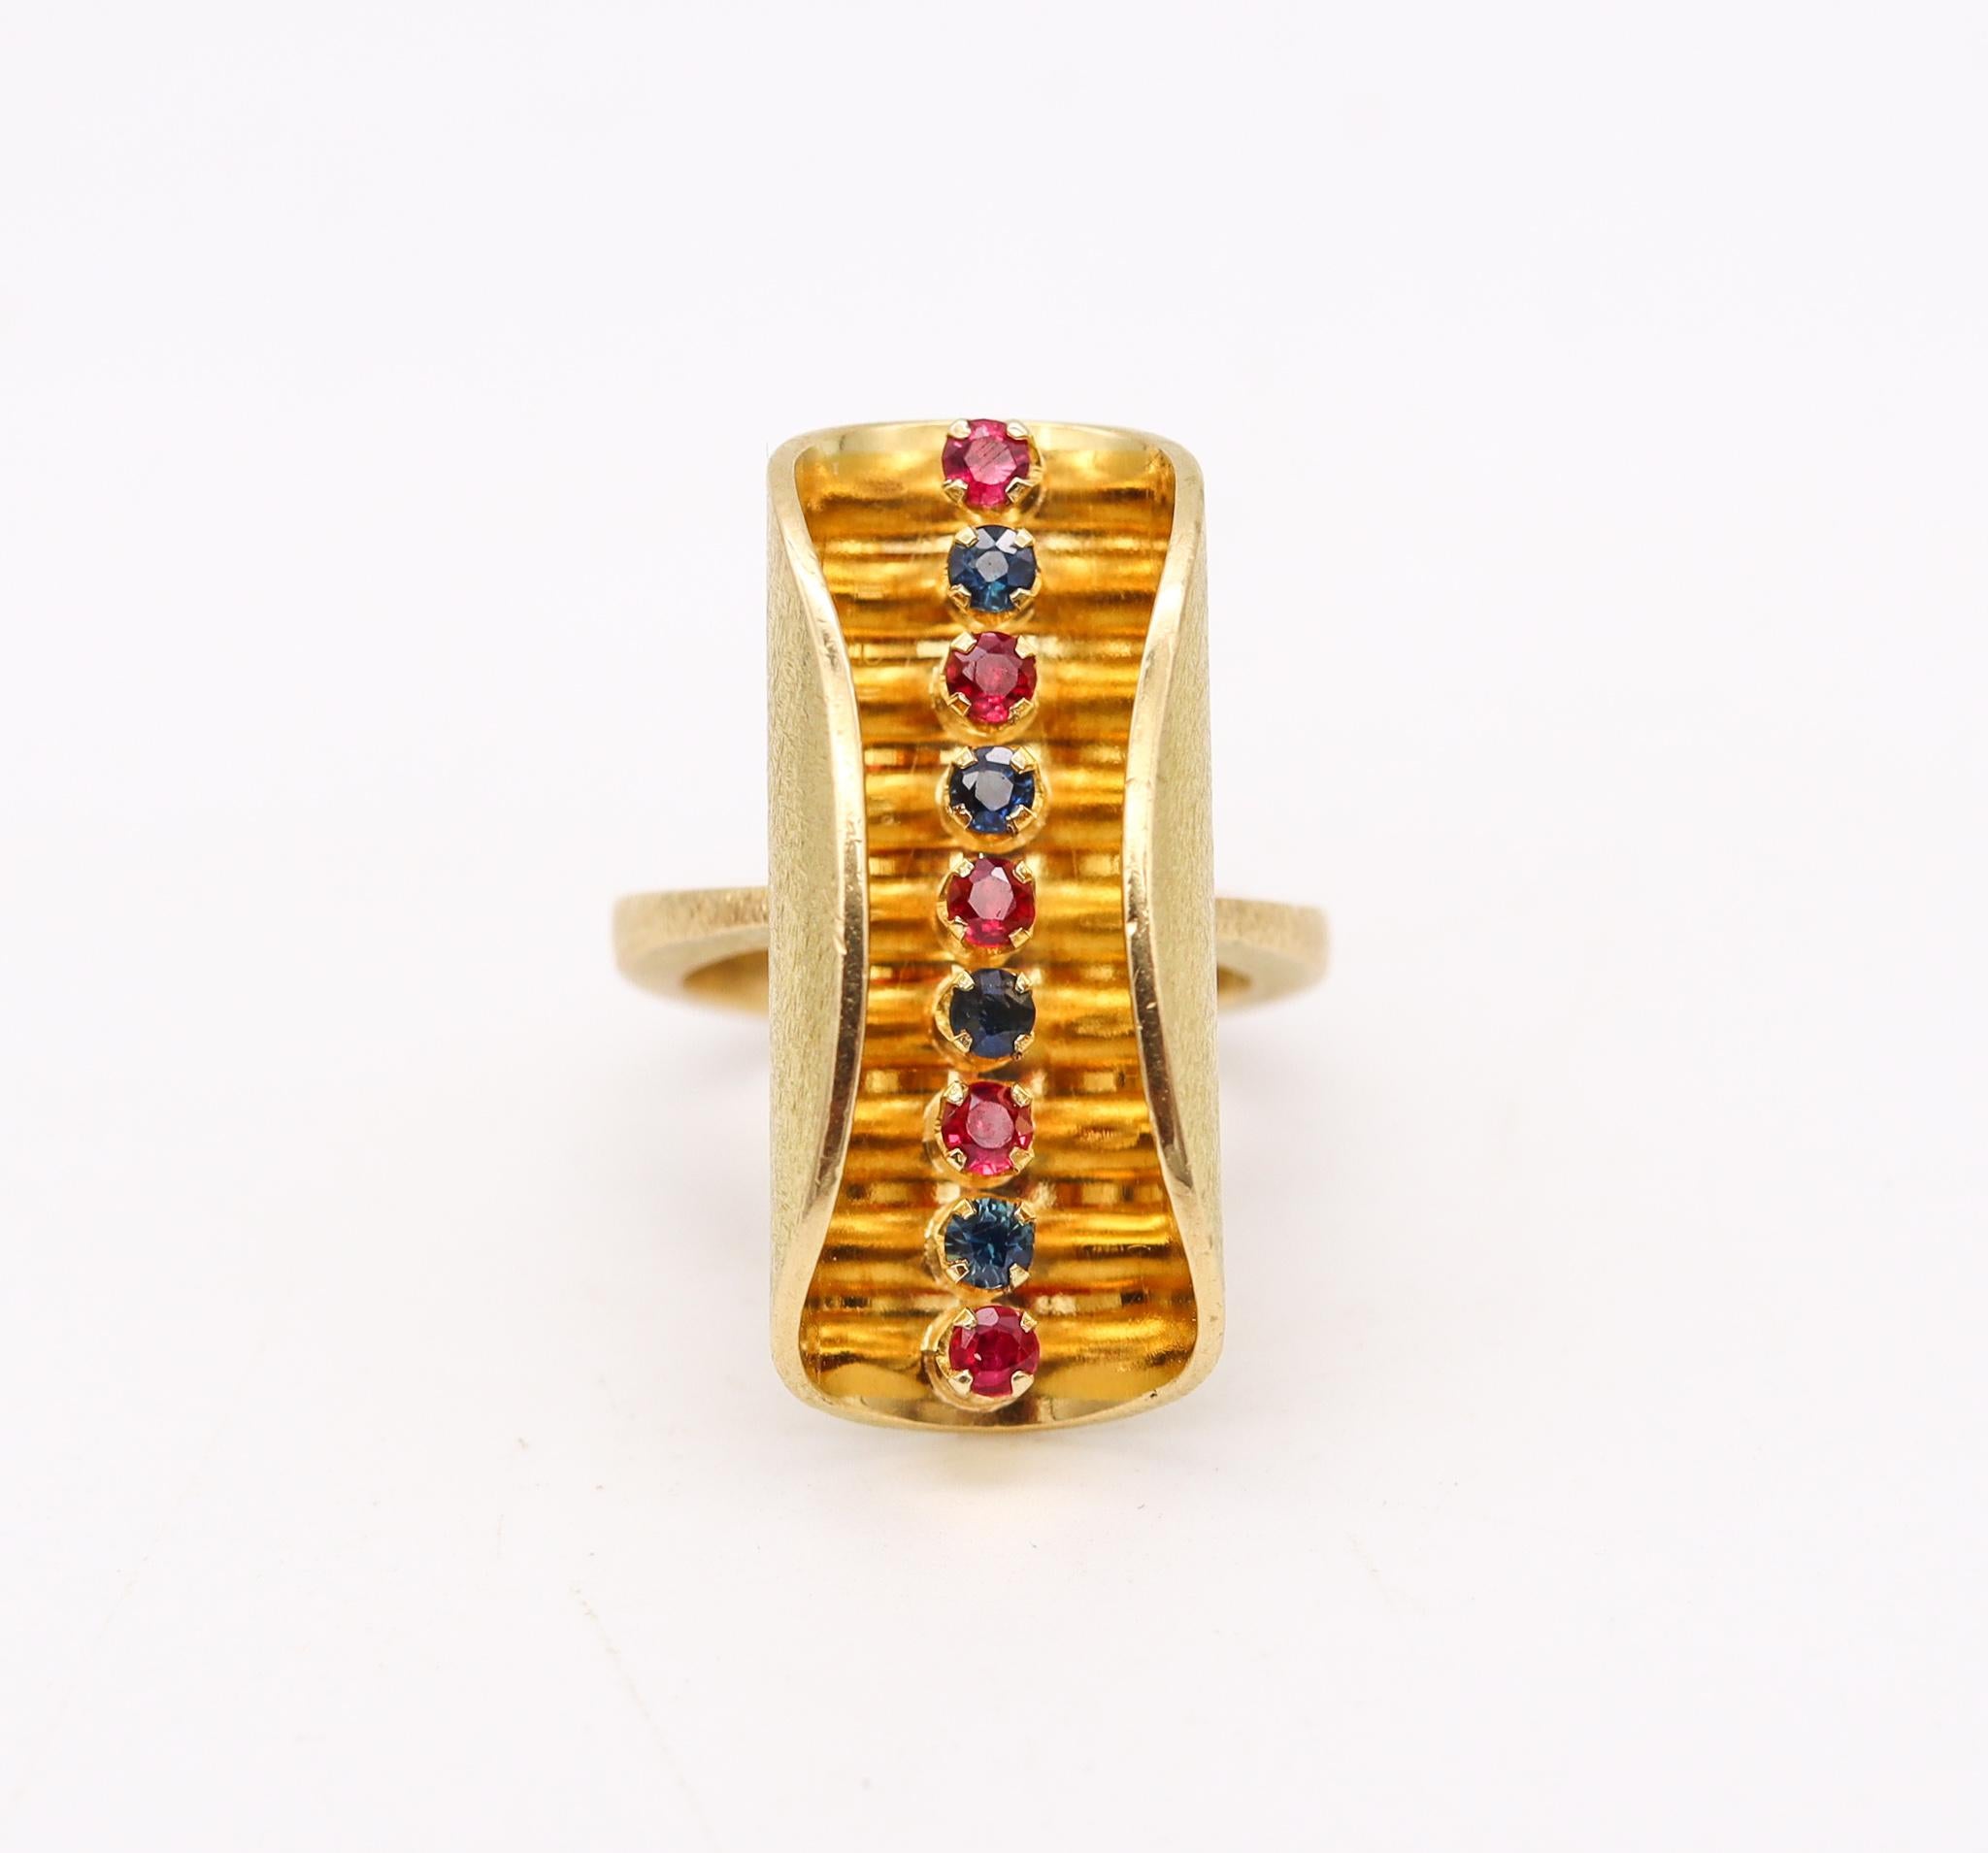 Modernist Scandinavian 1970 Op-Art Sculptural Ring in 18Kt Gold with Sapphires and Rubies For Sale